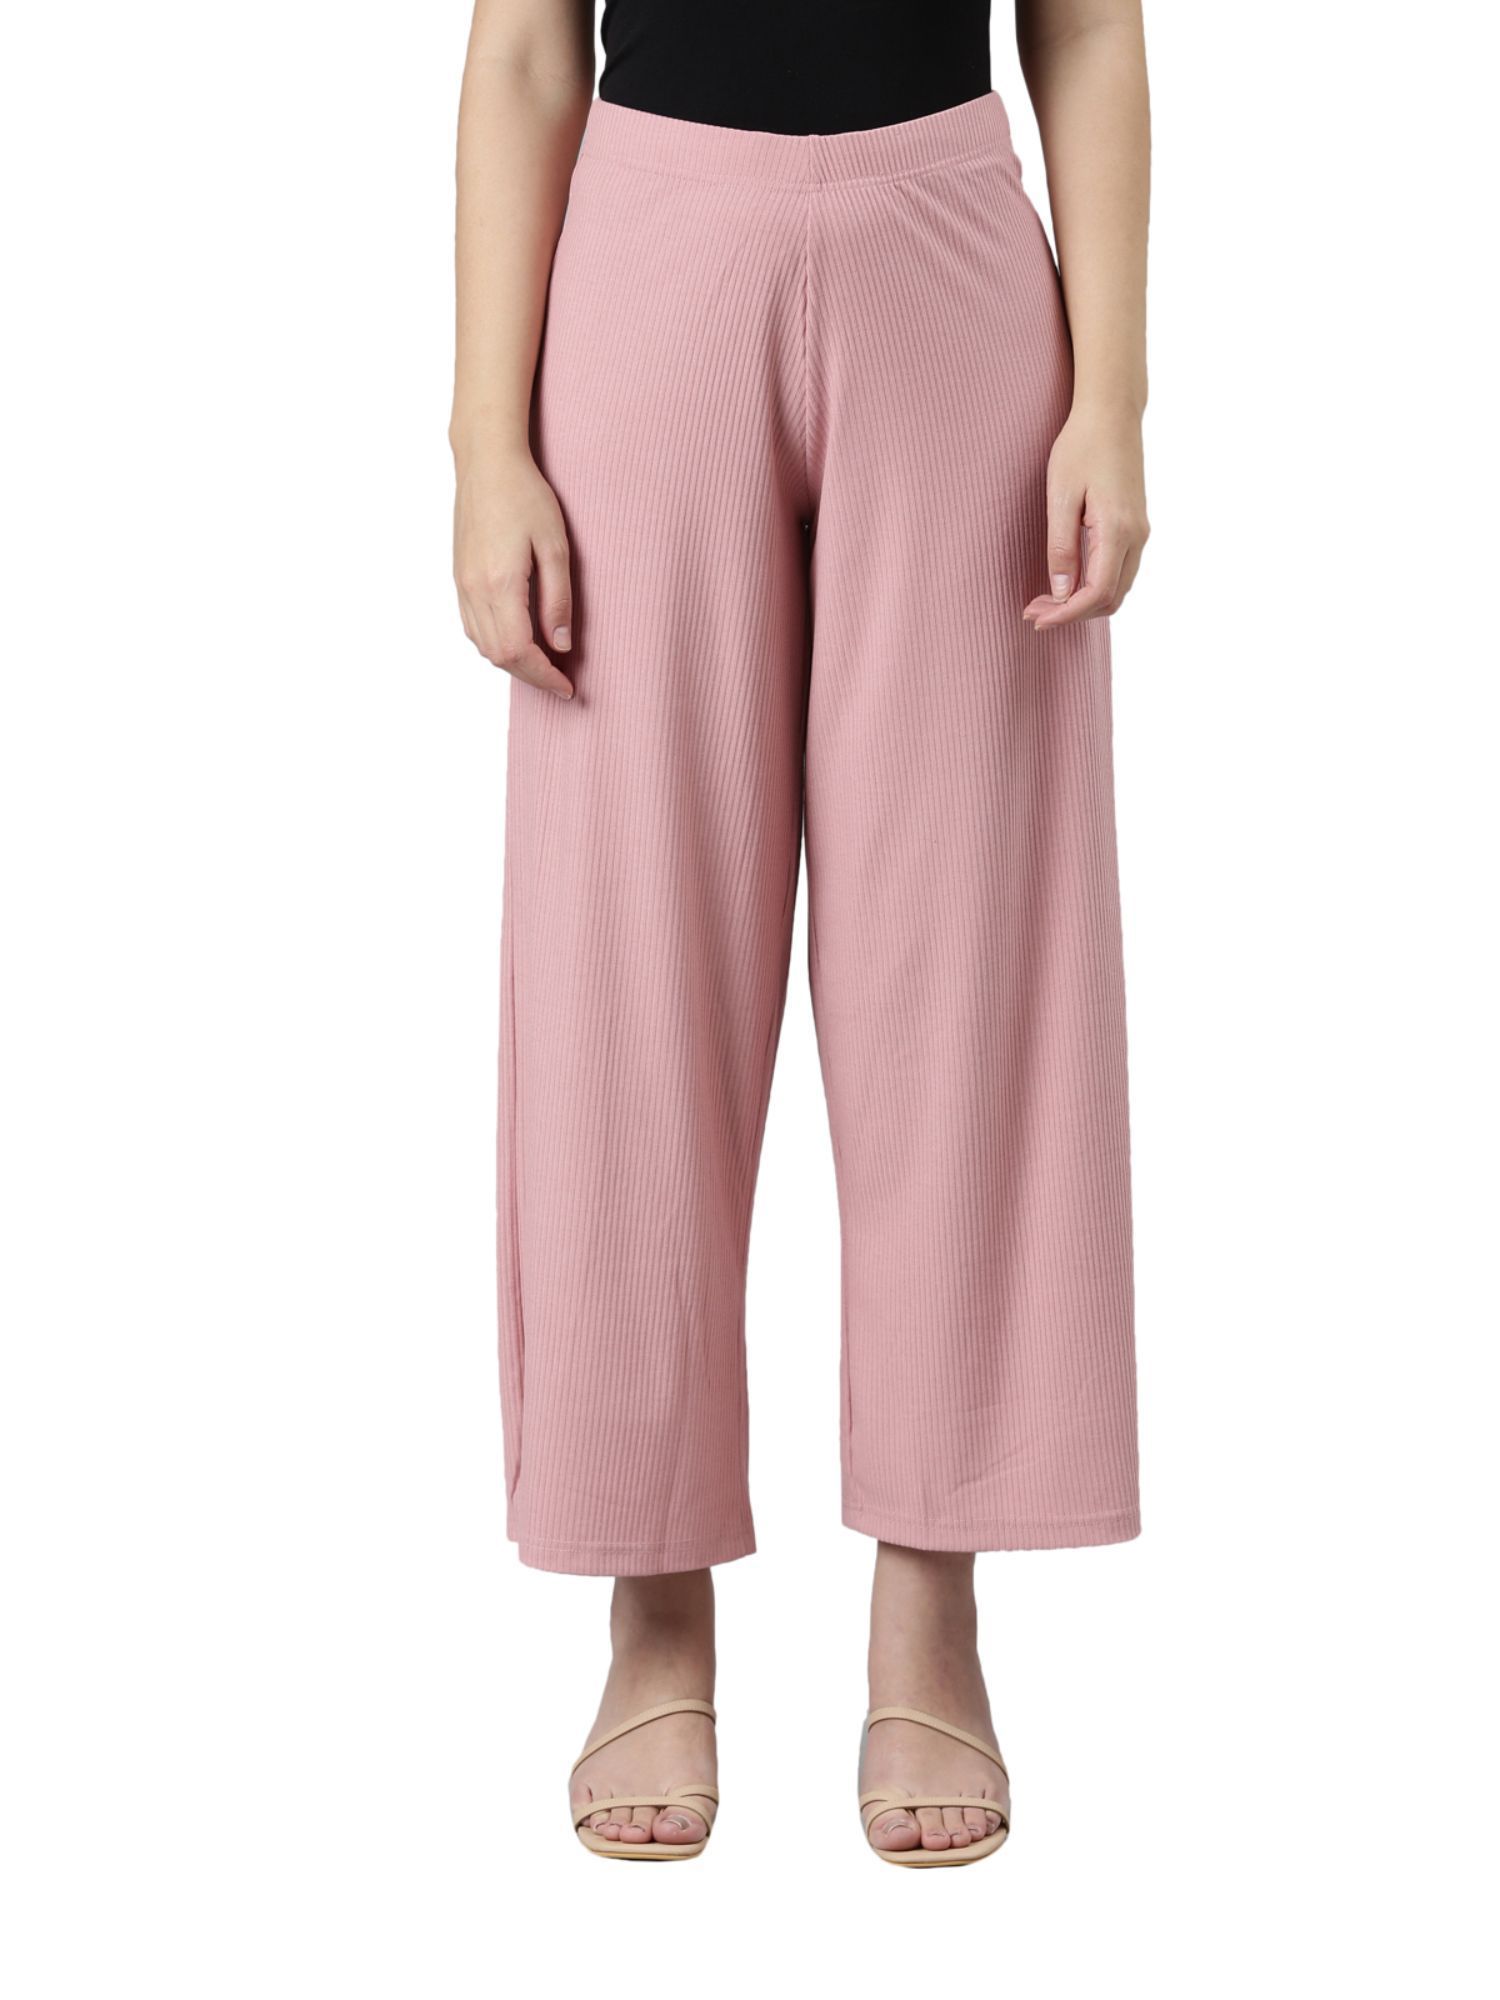 Glonme High Waist Boho Beach Pants for Women Loose Fit Summer Loungewear  Solid Color Palazzo Pants with Pockets Pink 3XL - Walmart.com